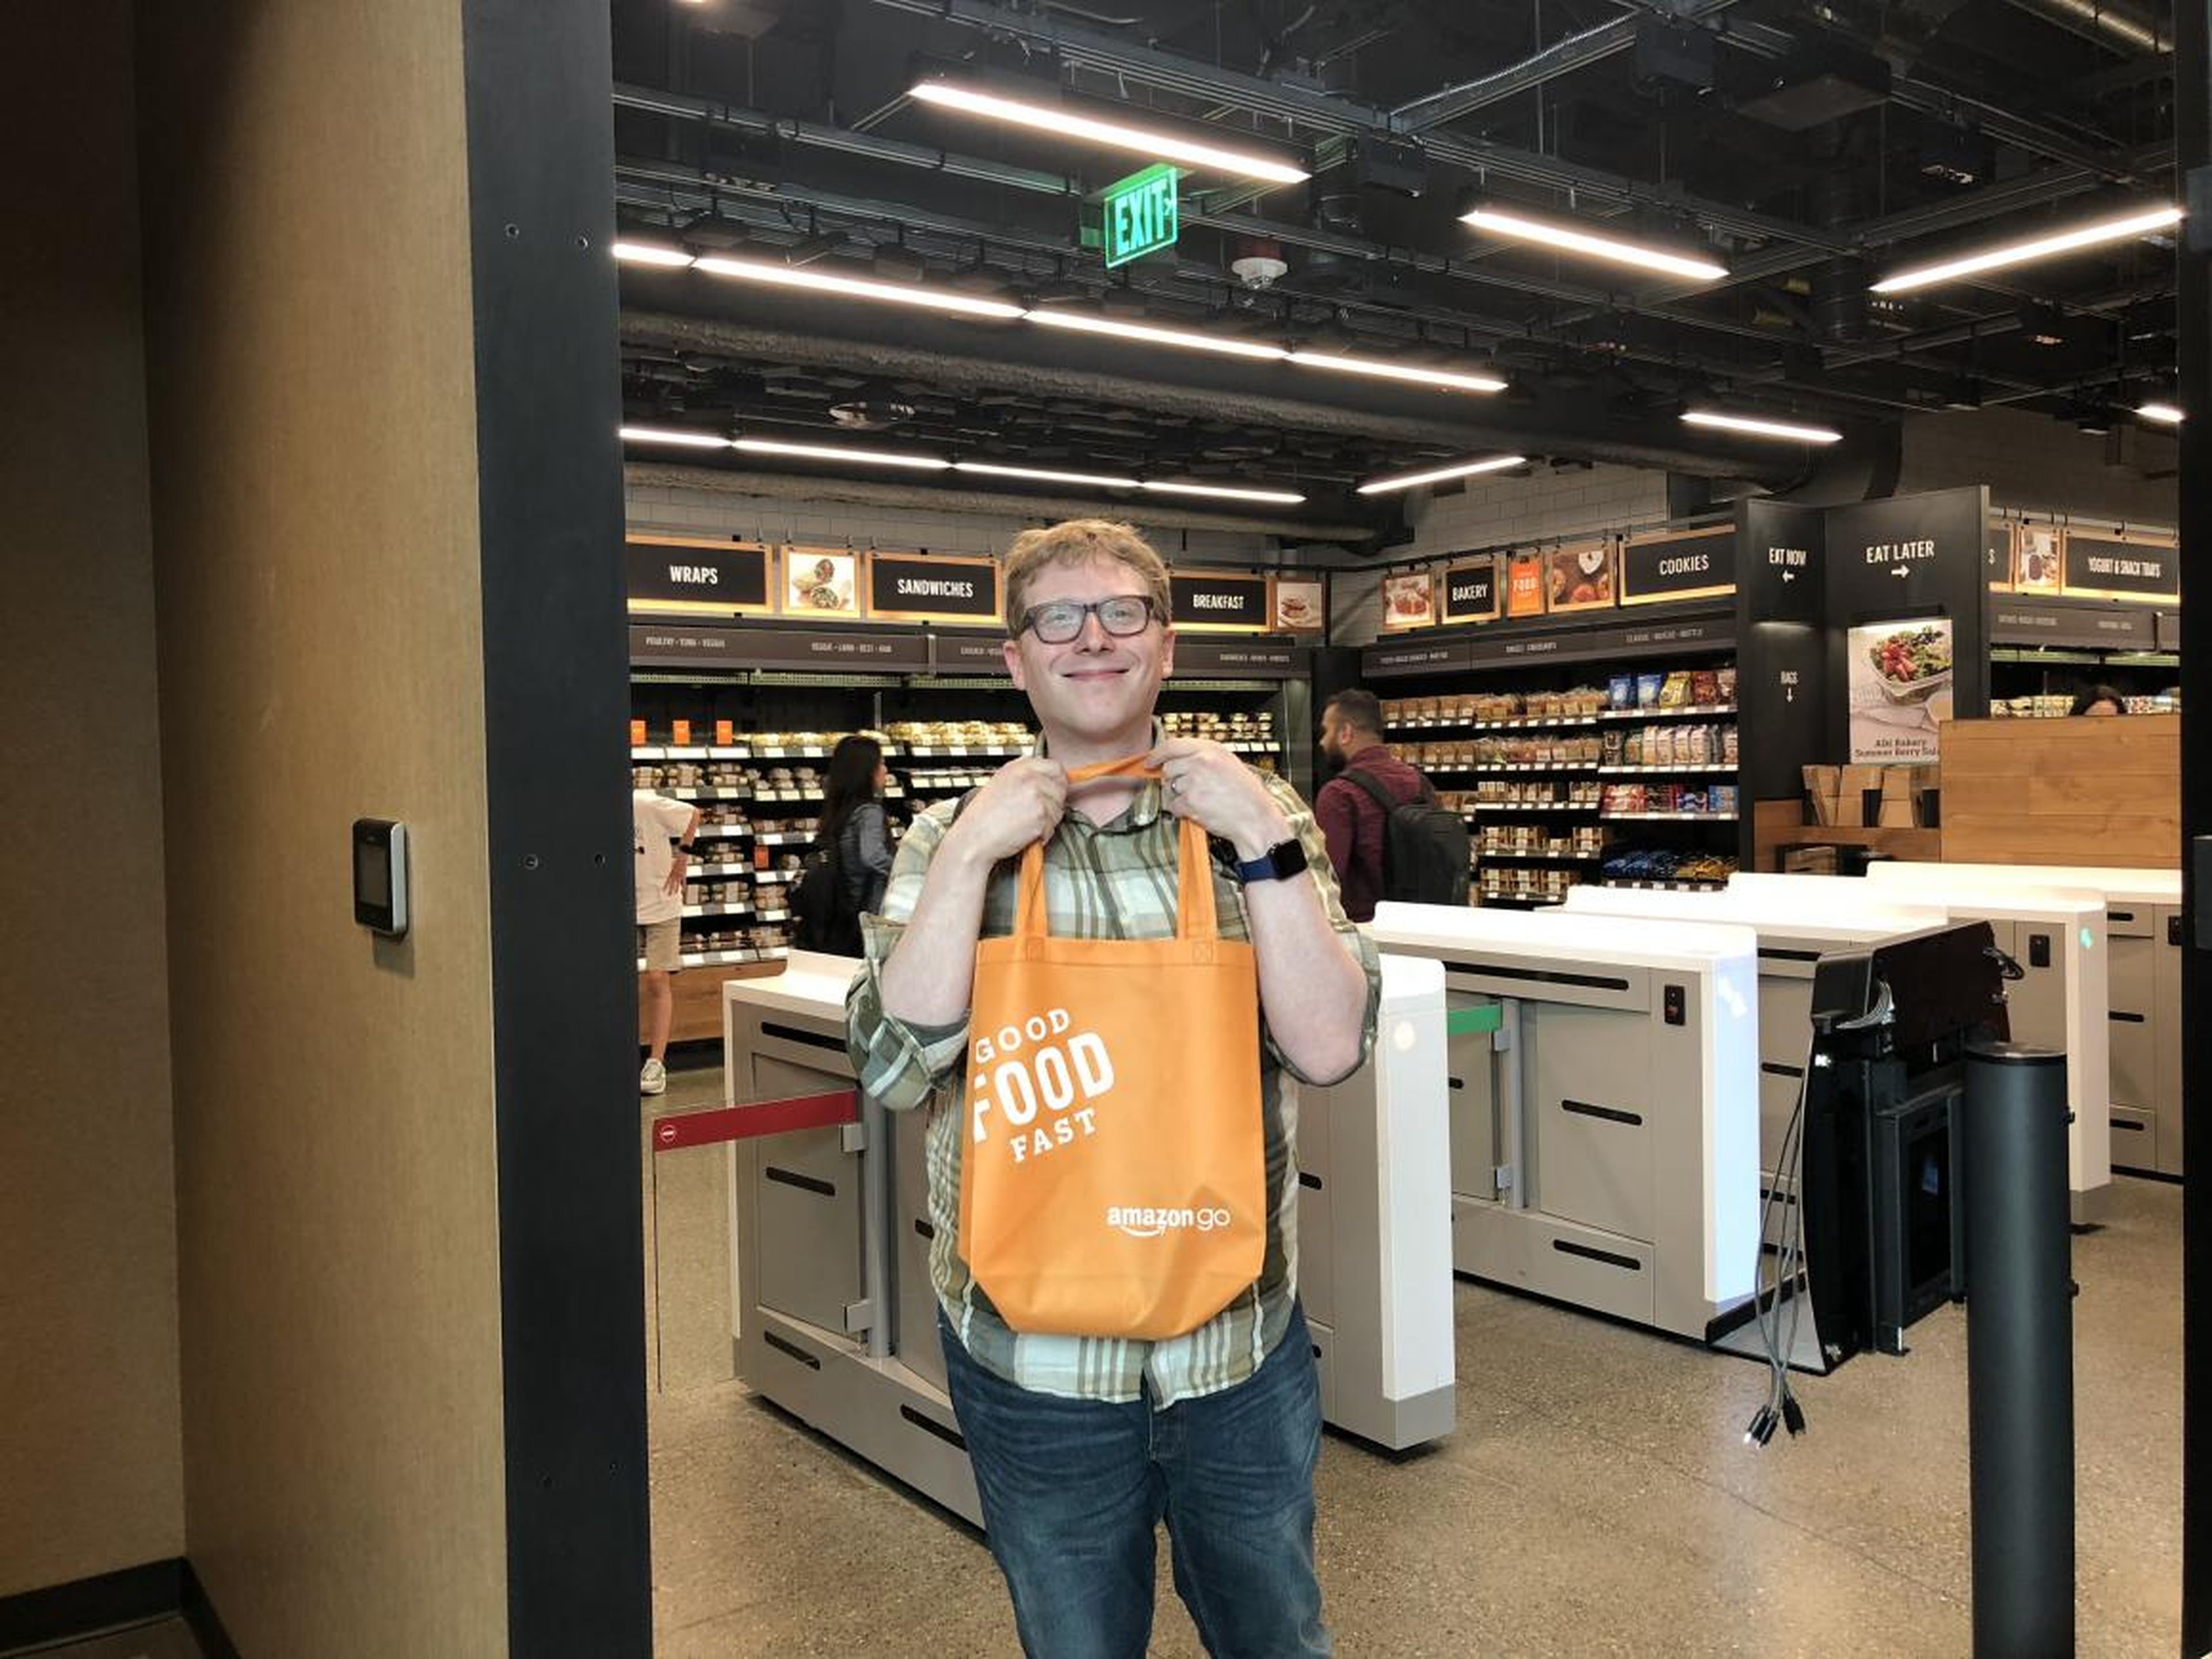 Overall, I was pretty happy with my Amazon Go shopping trip. The prices are good, the selection is solid, and I was crazy impressed with how seamlessly all the technology worked.